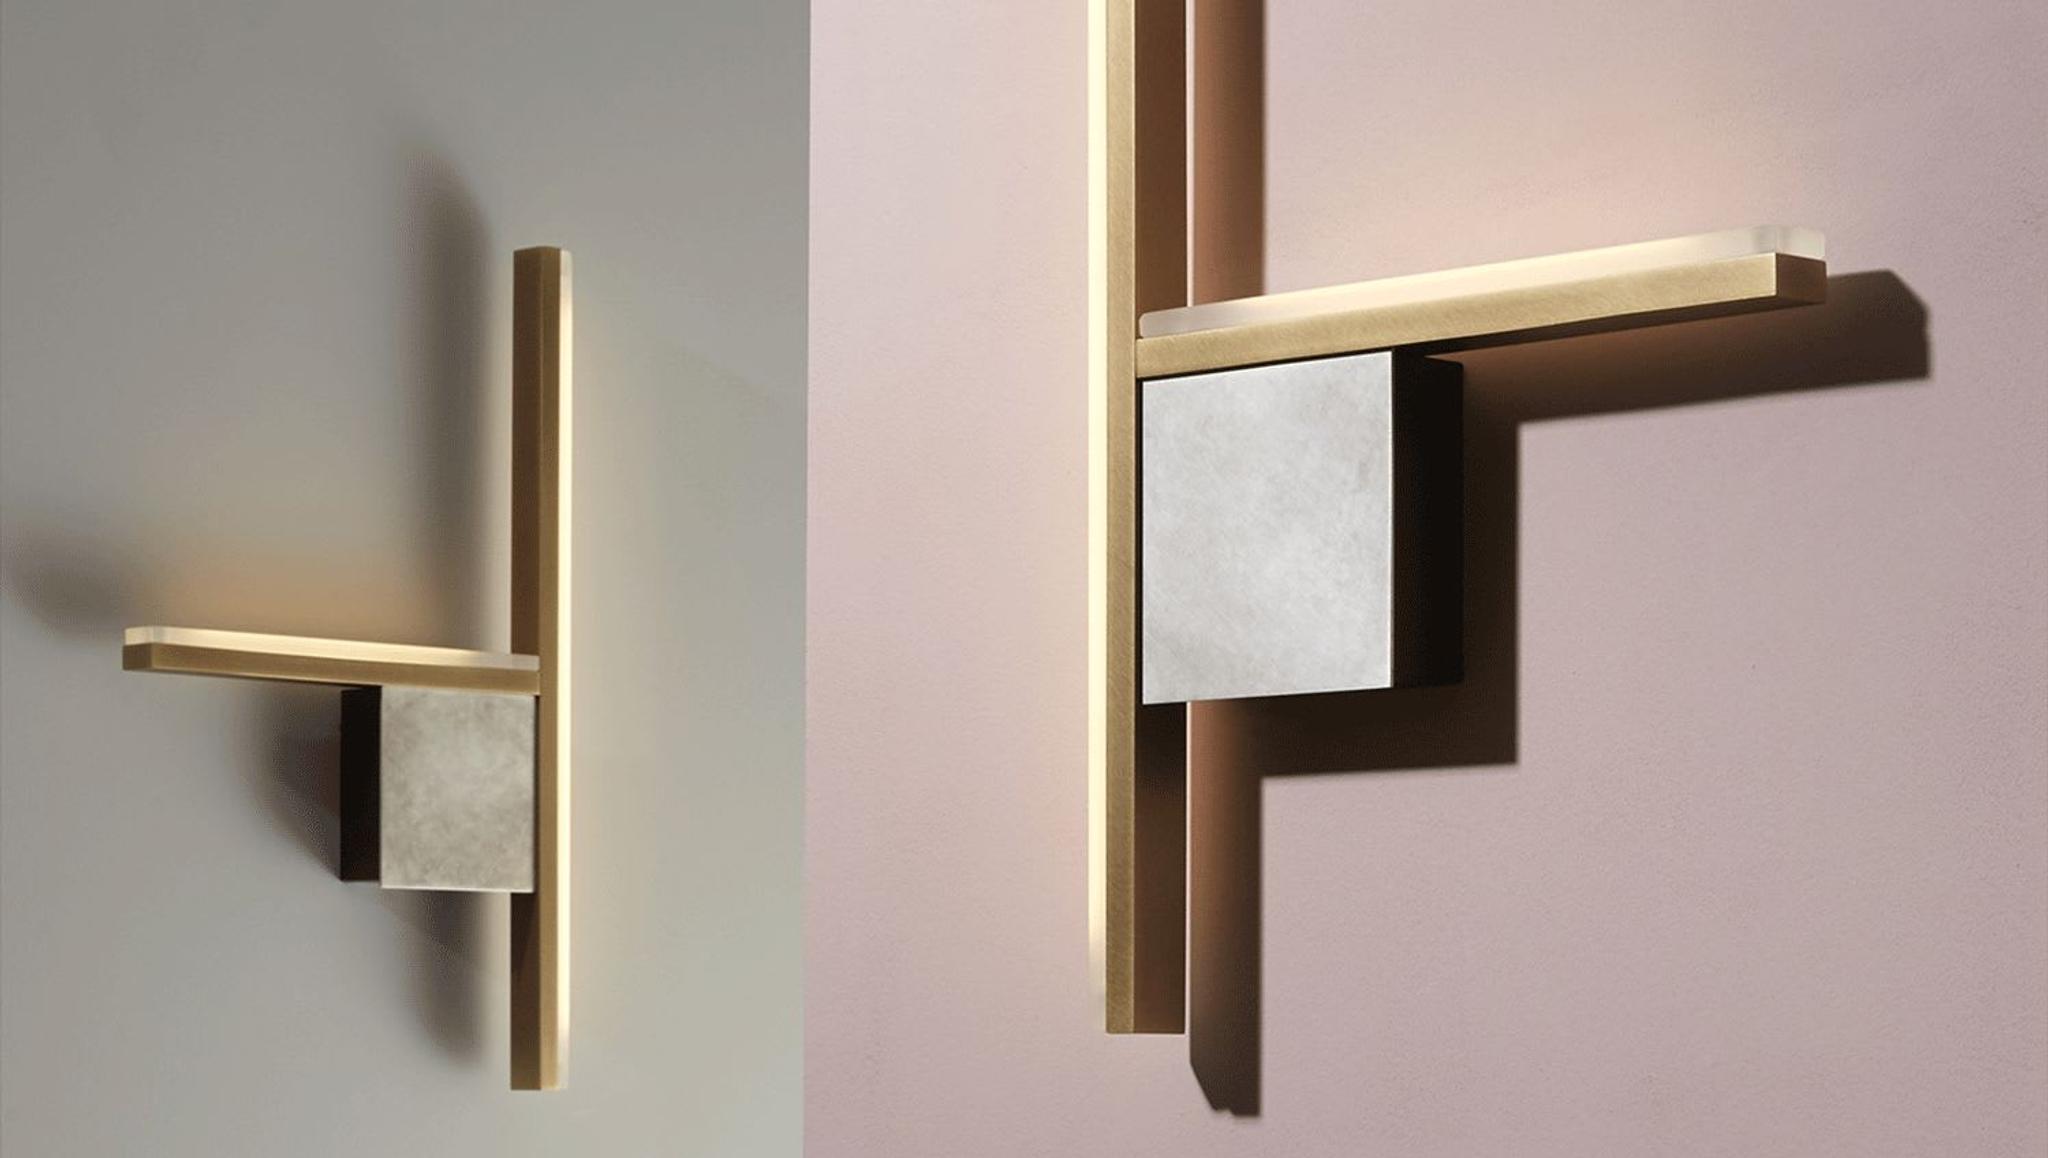 Lighting: Geometric Shapes and Soft Finishes